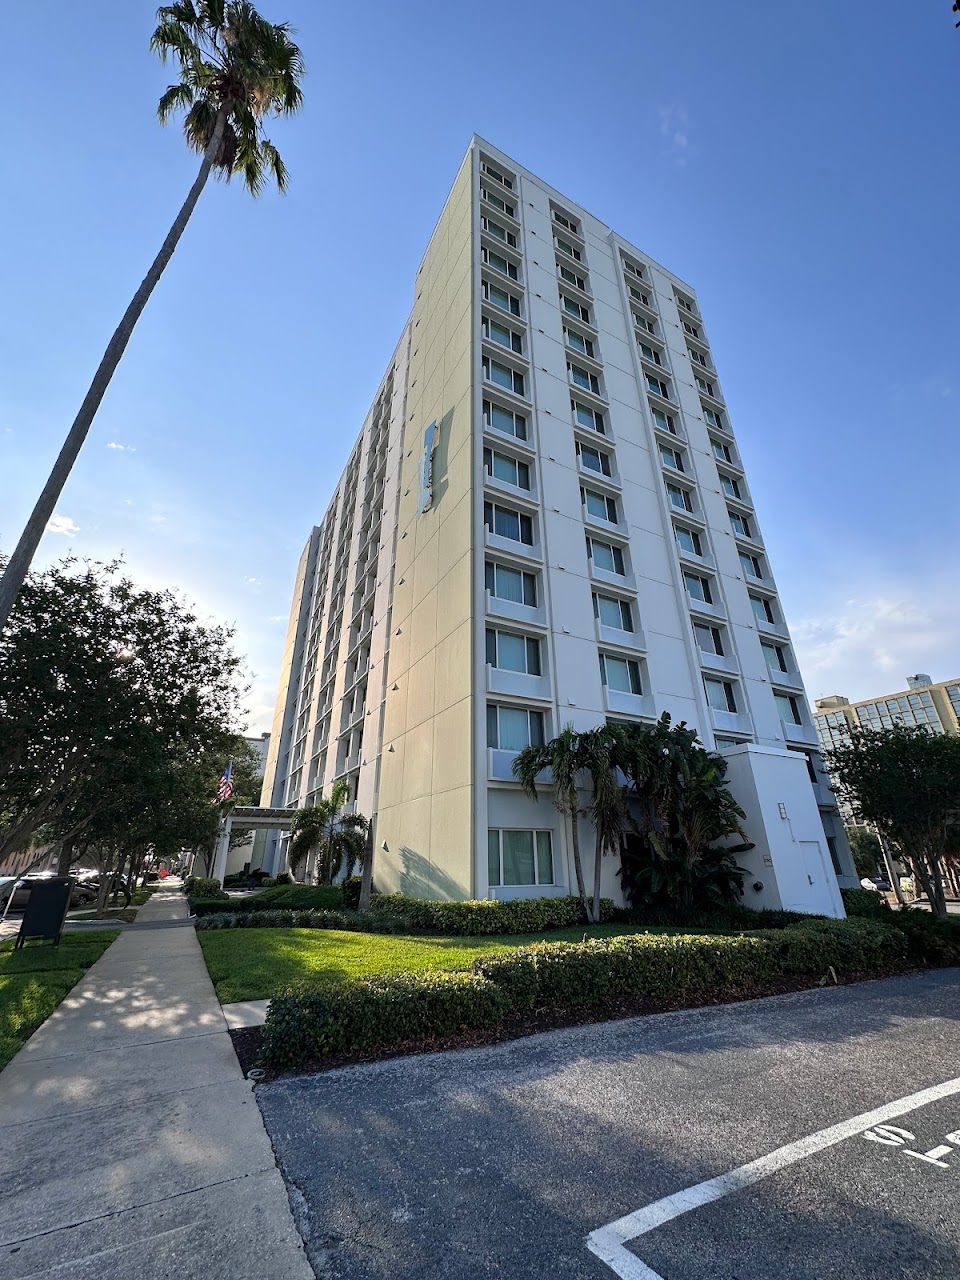 Photo of 540 TOWN CENTER. Affordable housing located at 540 SECOND AVE. SOUTH ST PETERSBURG, FL 33701